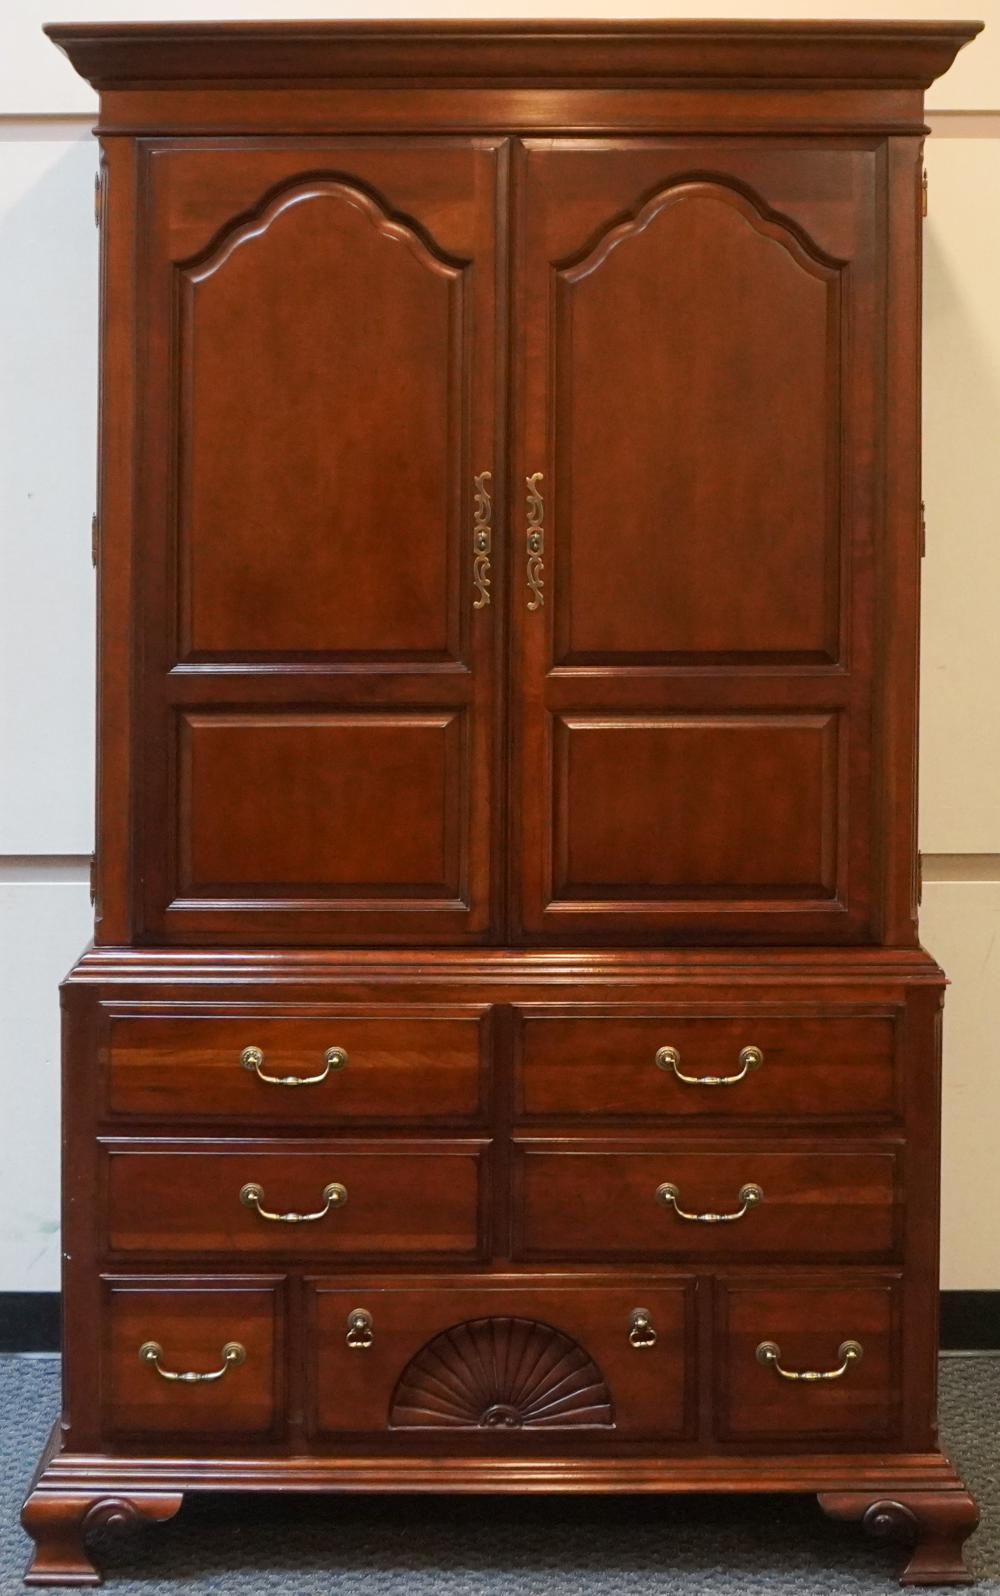 DREXEL HERITAGE CHIPPENDALE STYLE 2e7496